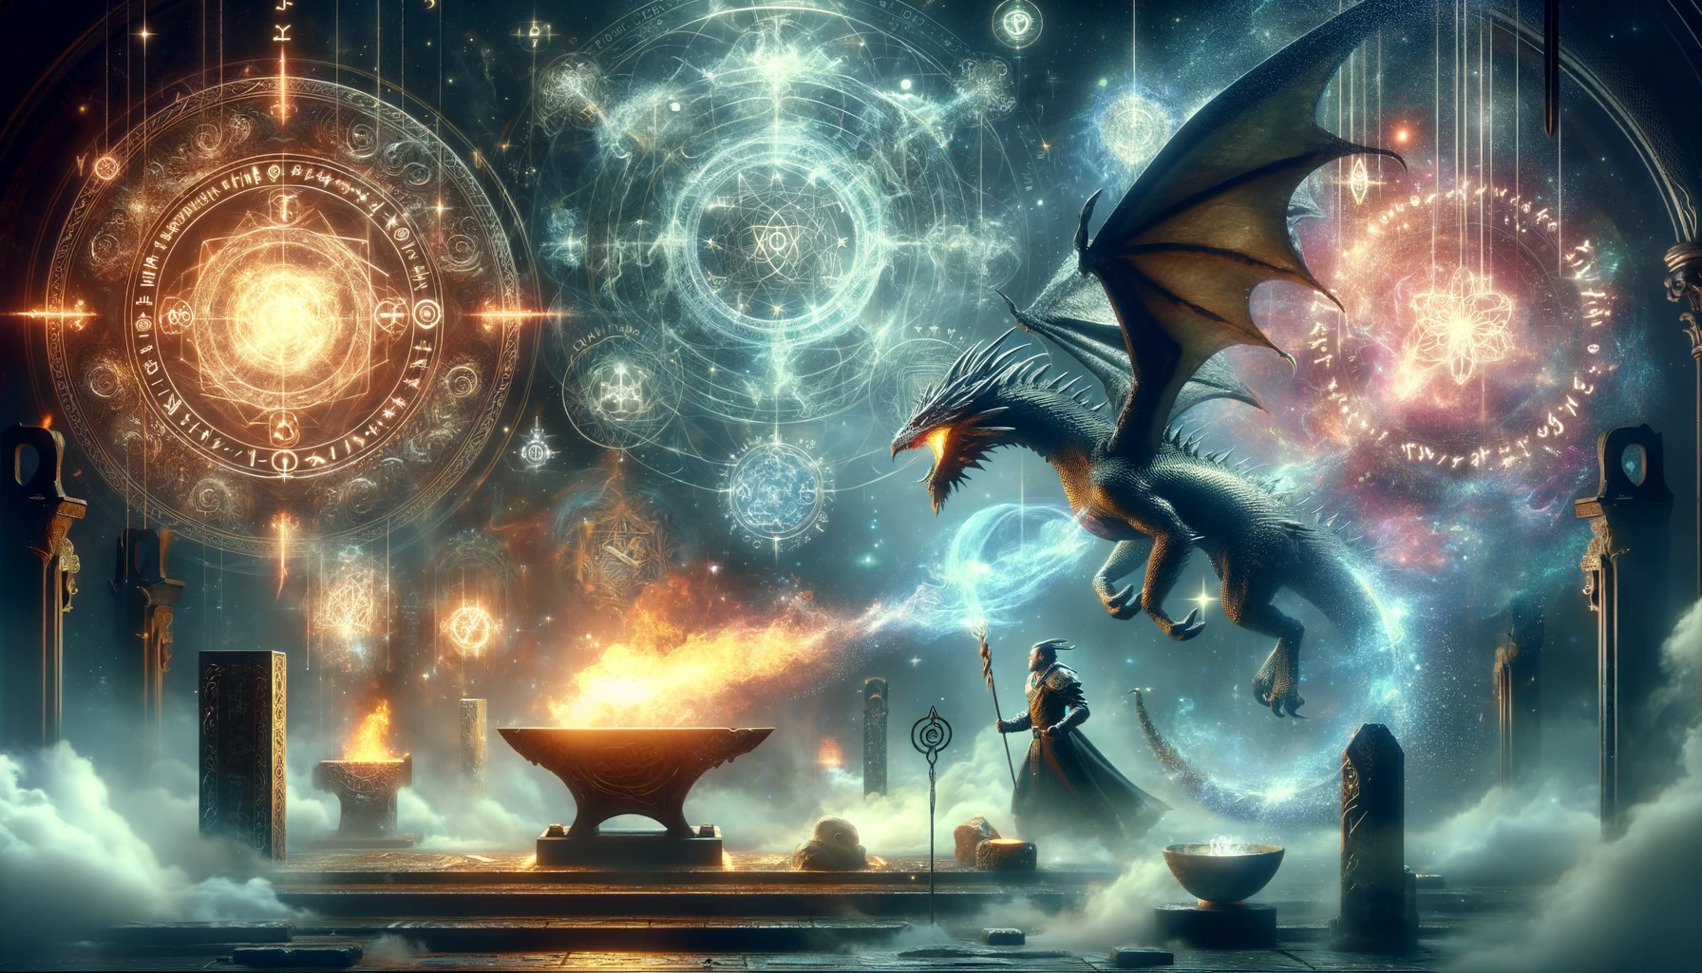 a cinematic image that captures the concept of a 'Dragonborn Name Generator', featuring fantastical and mystical elements, symbolizing the creativity and fantasy associated with generating names for dragonborn characters.